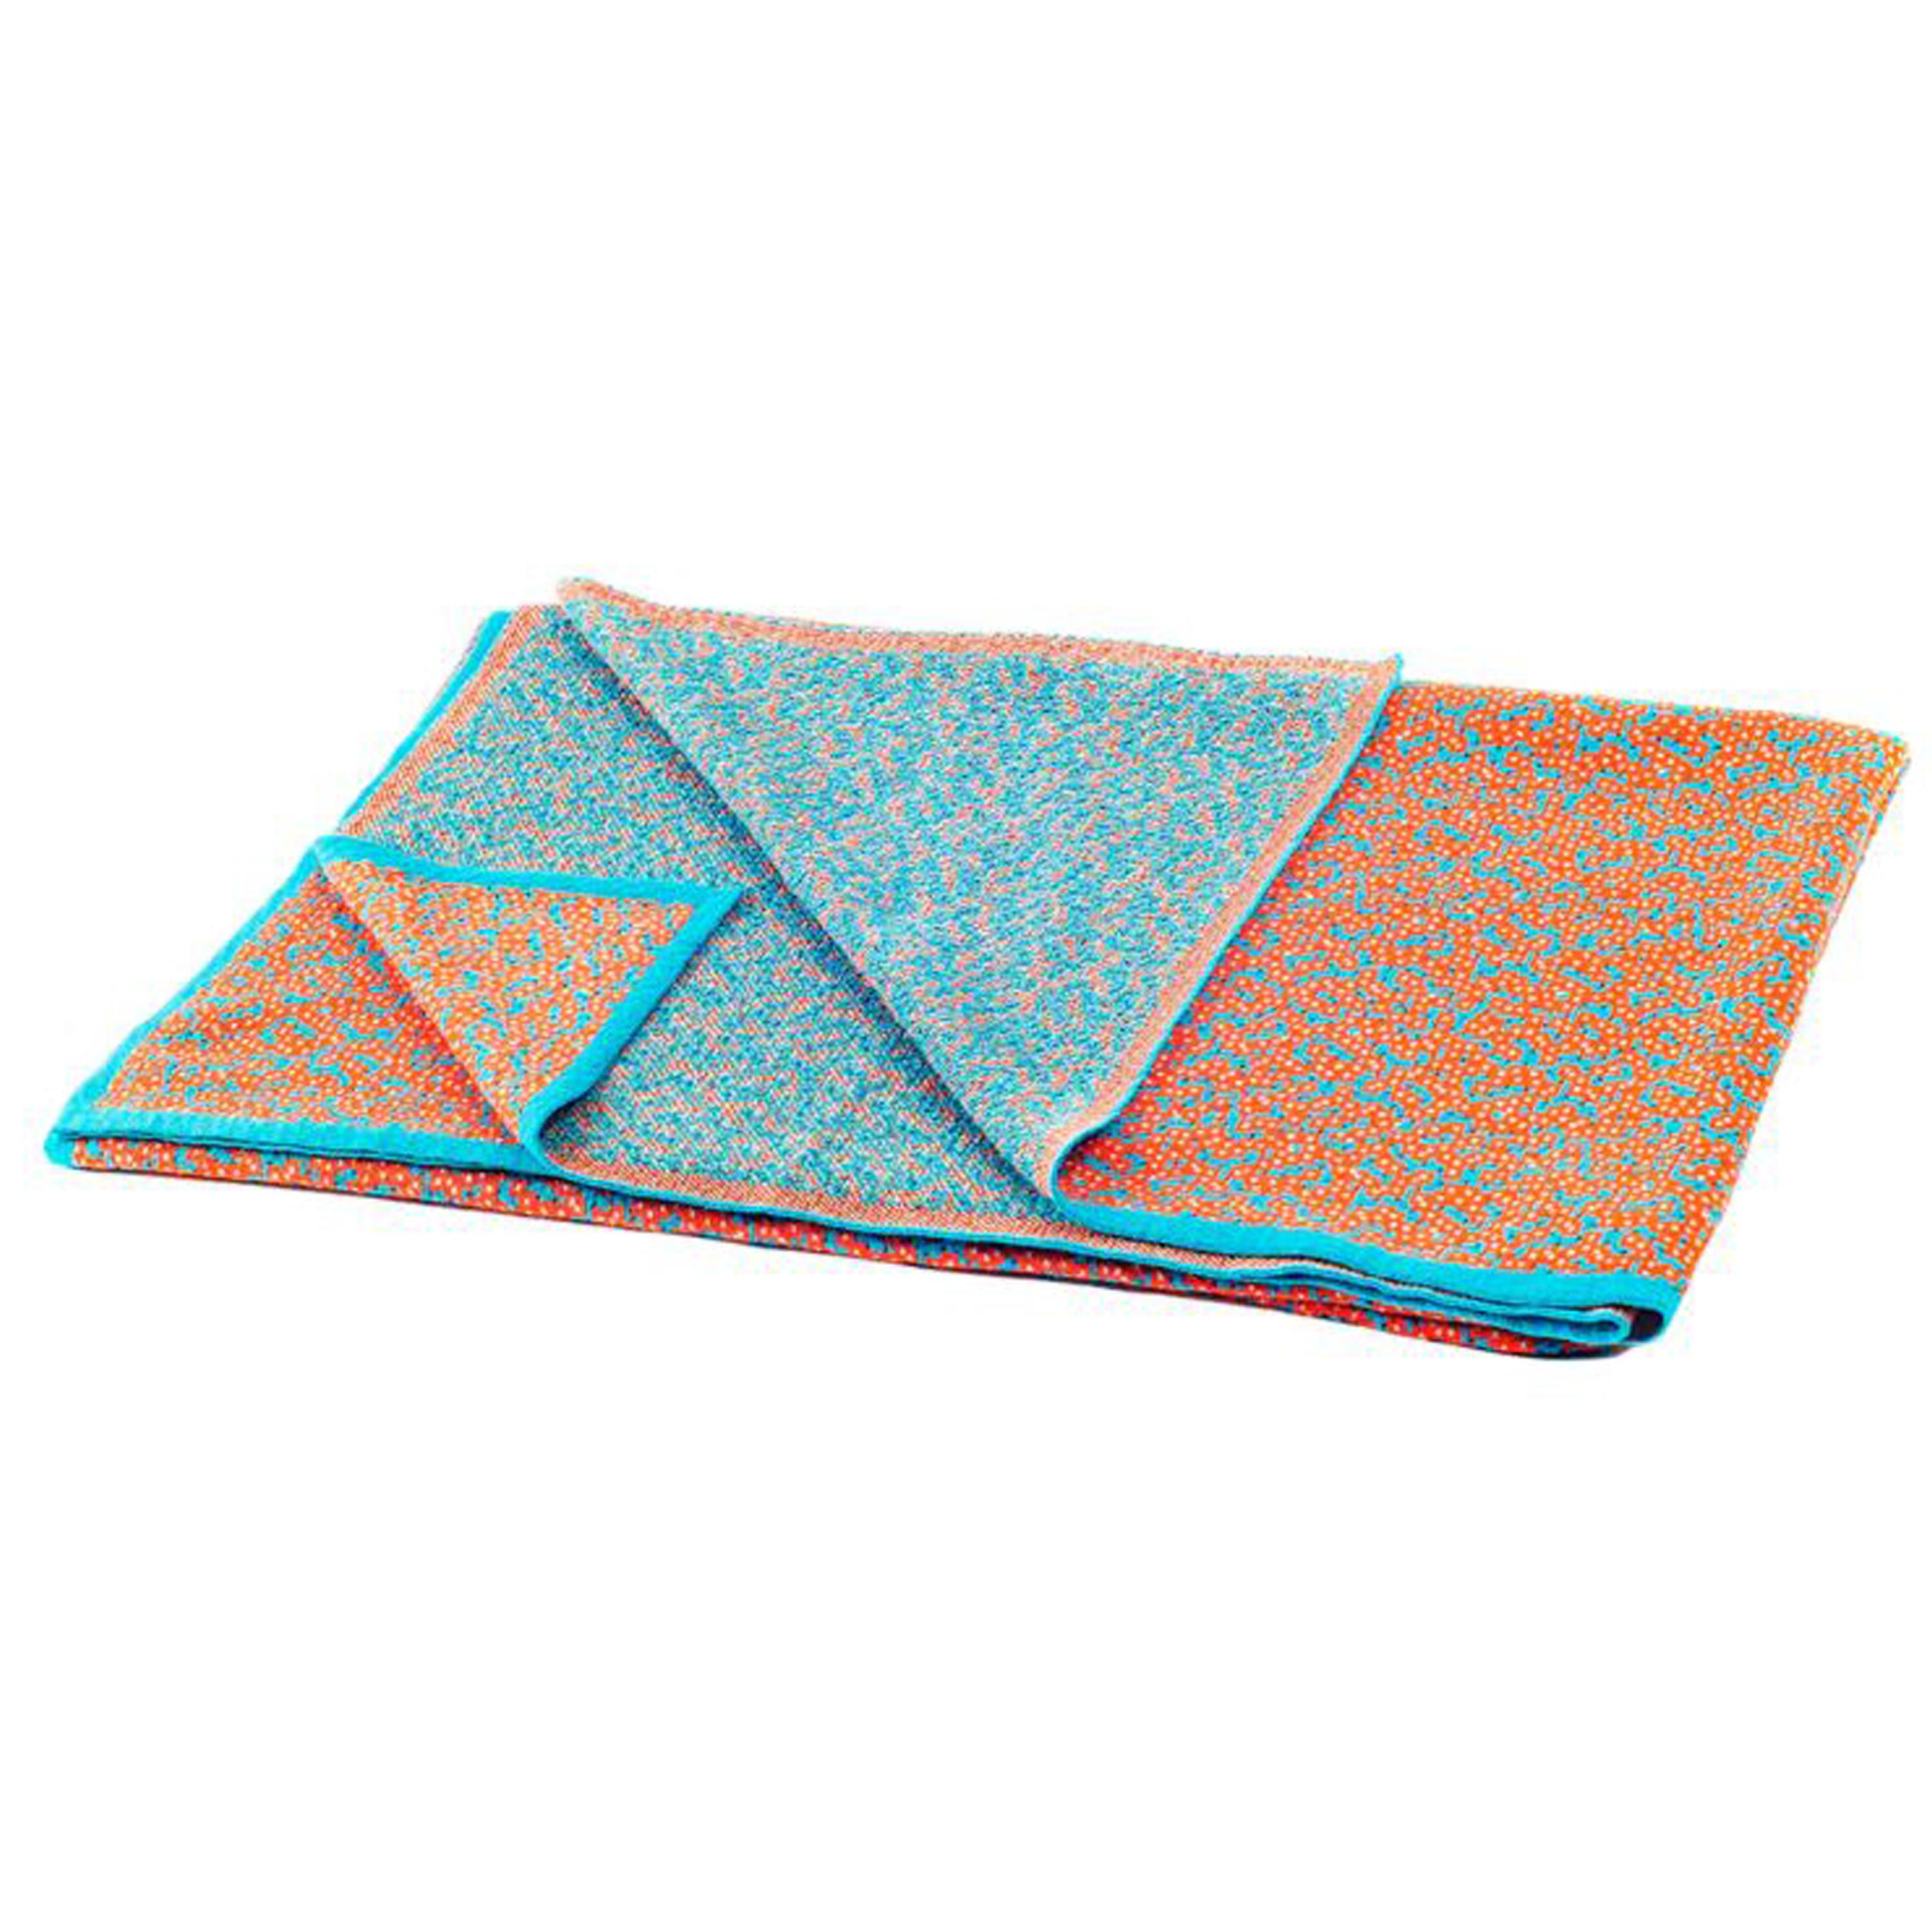 Hand-woven Orange and light blue throw designed by Cristian Zuzunaga, made of high-quality cotton with a hint of nylon, lending the product a gentle stretch effect. Blanket knitted using a jacquard technique with four contrasting colors - three in